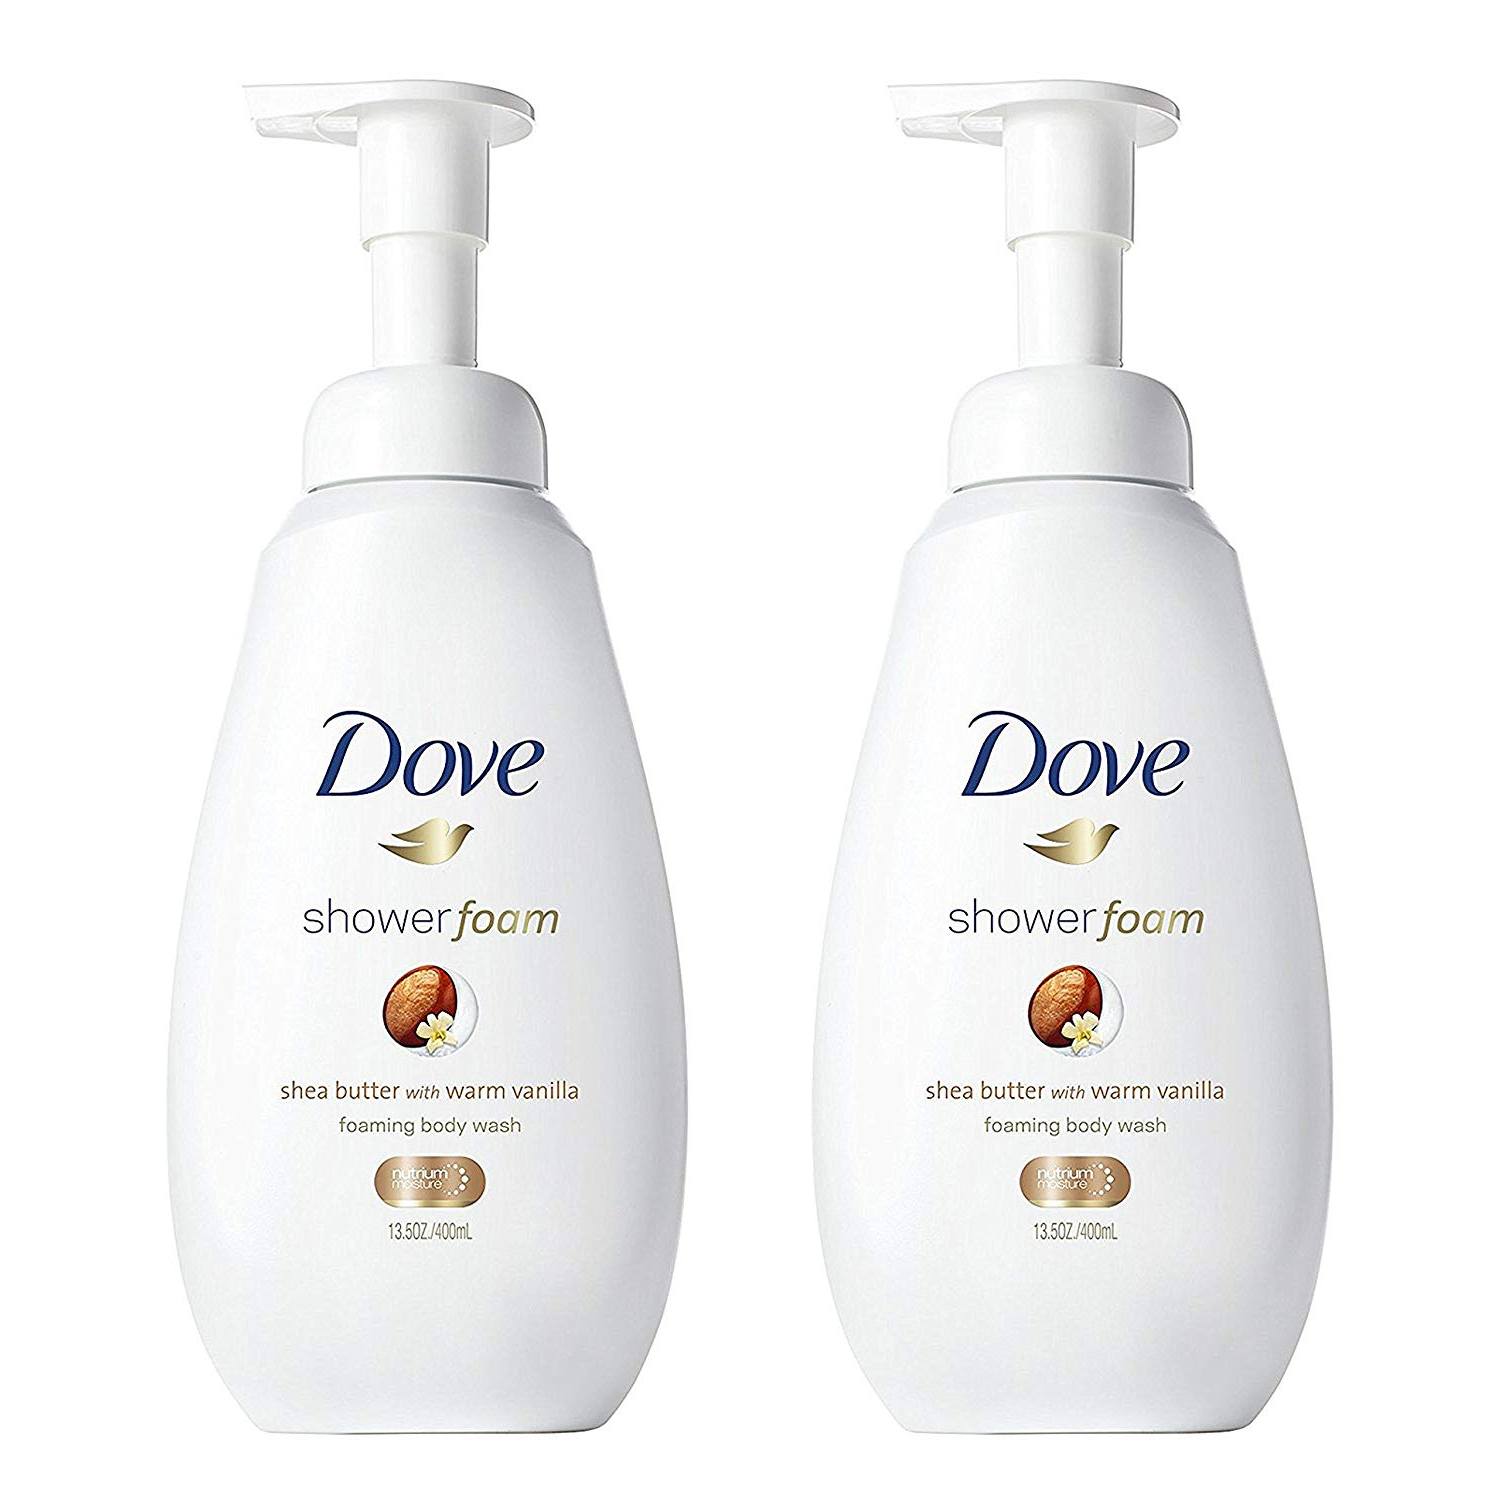 Dove Shower Foam Body Wash (Shea Butter with Warm Vanilla) Only $5.94 Shipped!